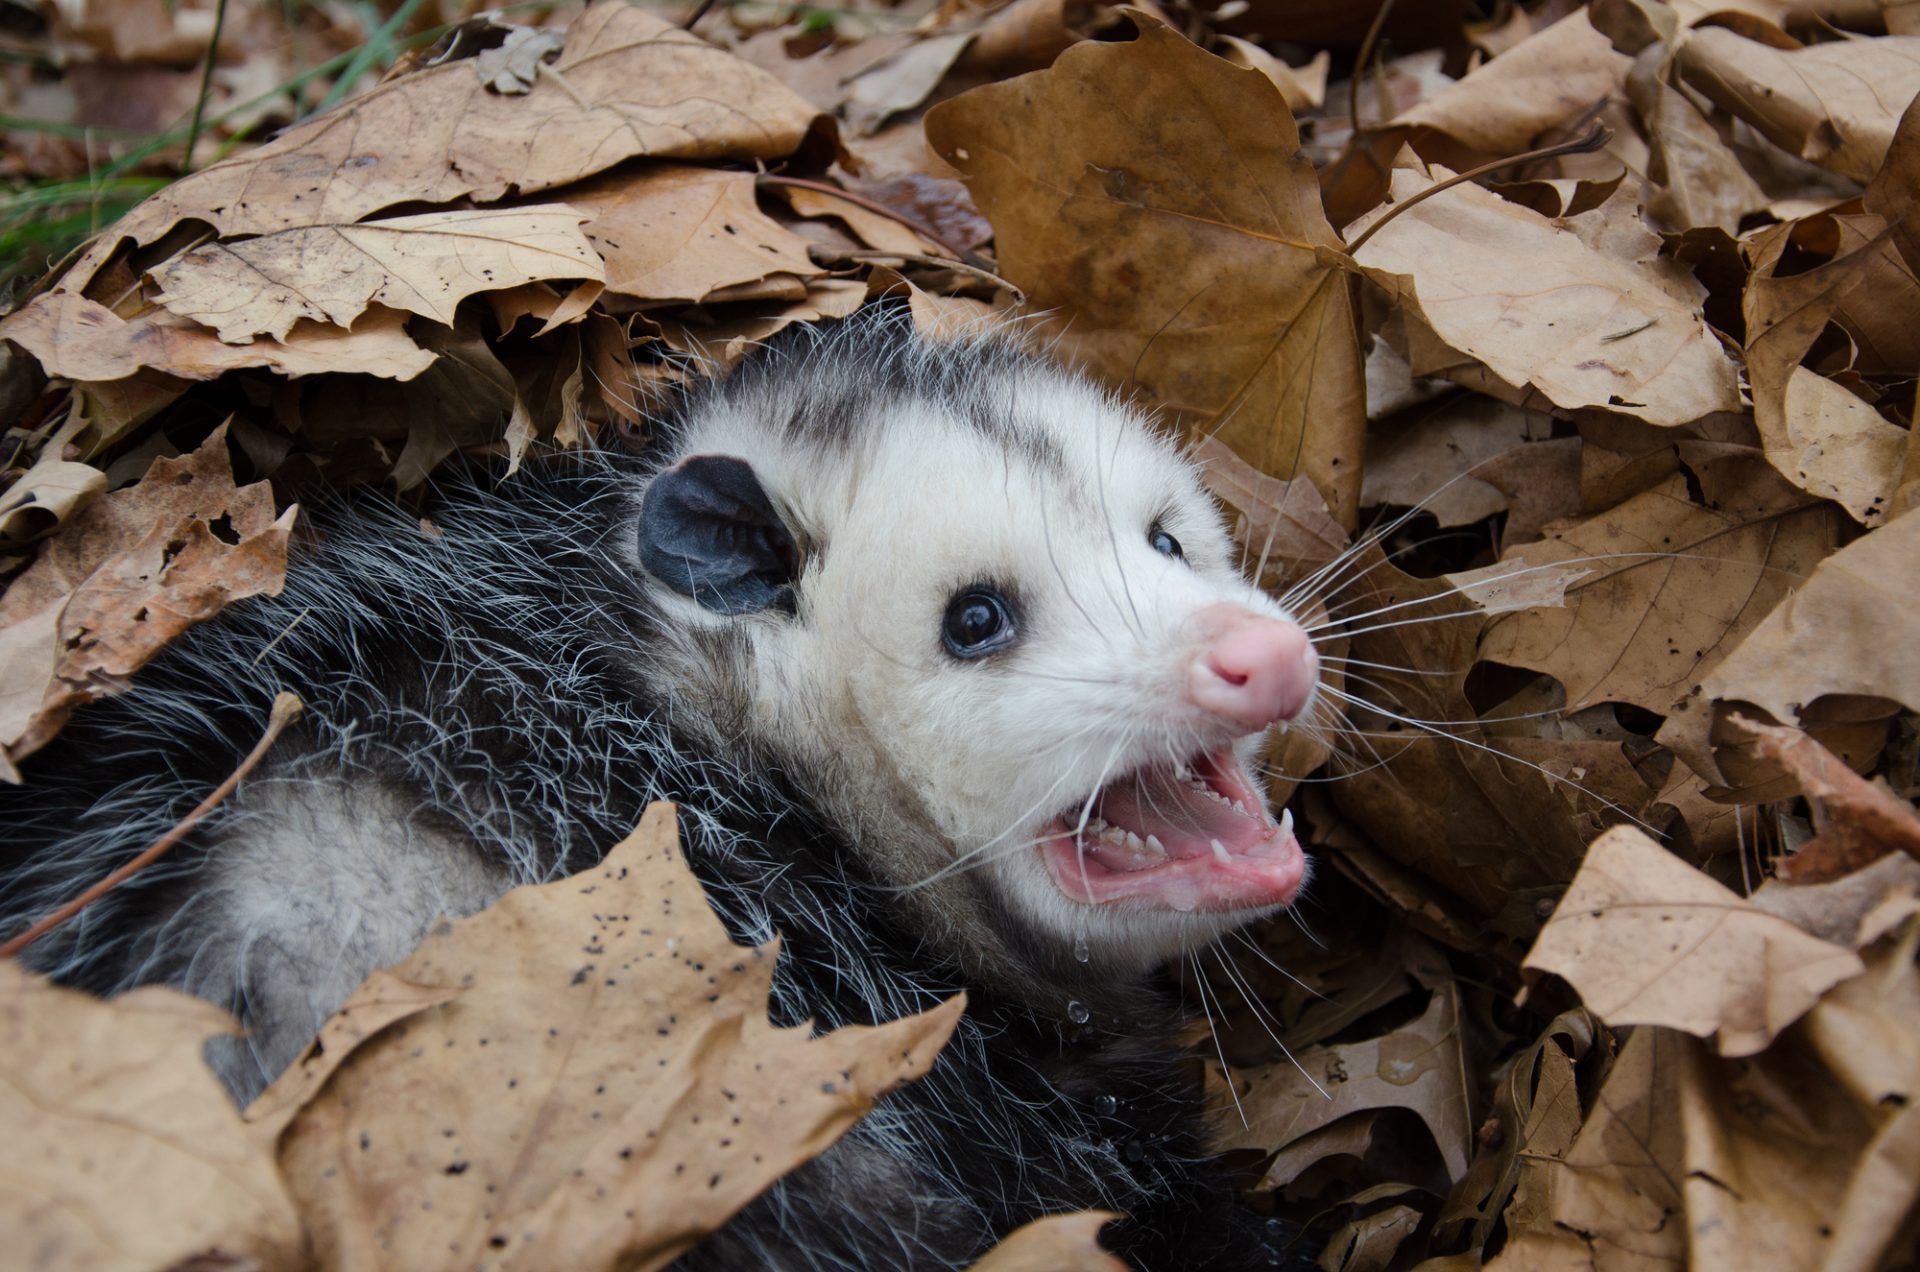 Do Possums Eat Bees? - A large Virginai opossum bedded down in leaves and showing its teeth